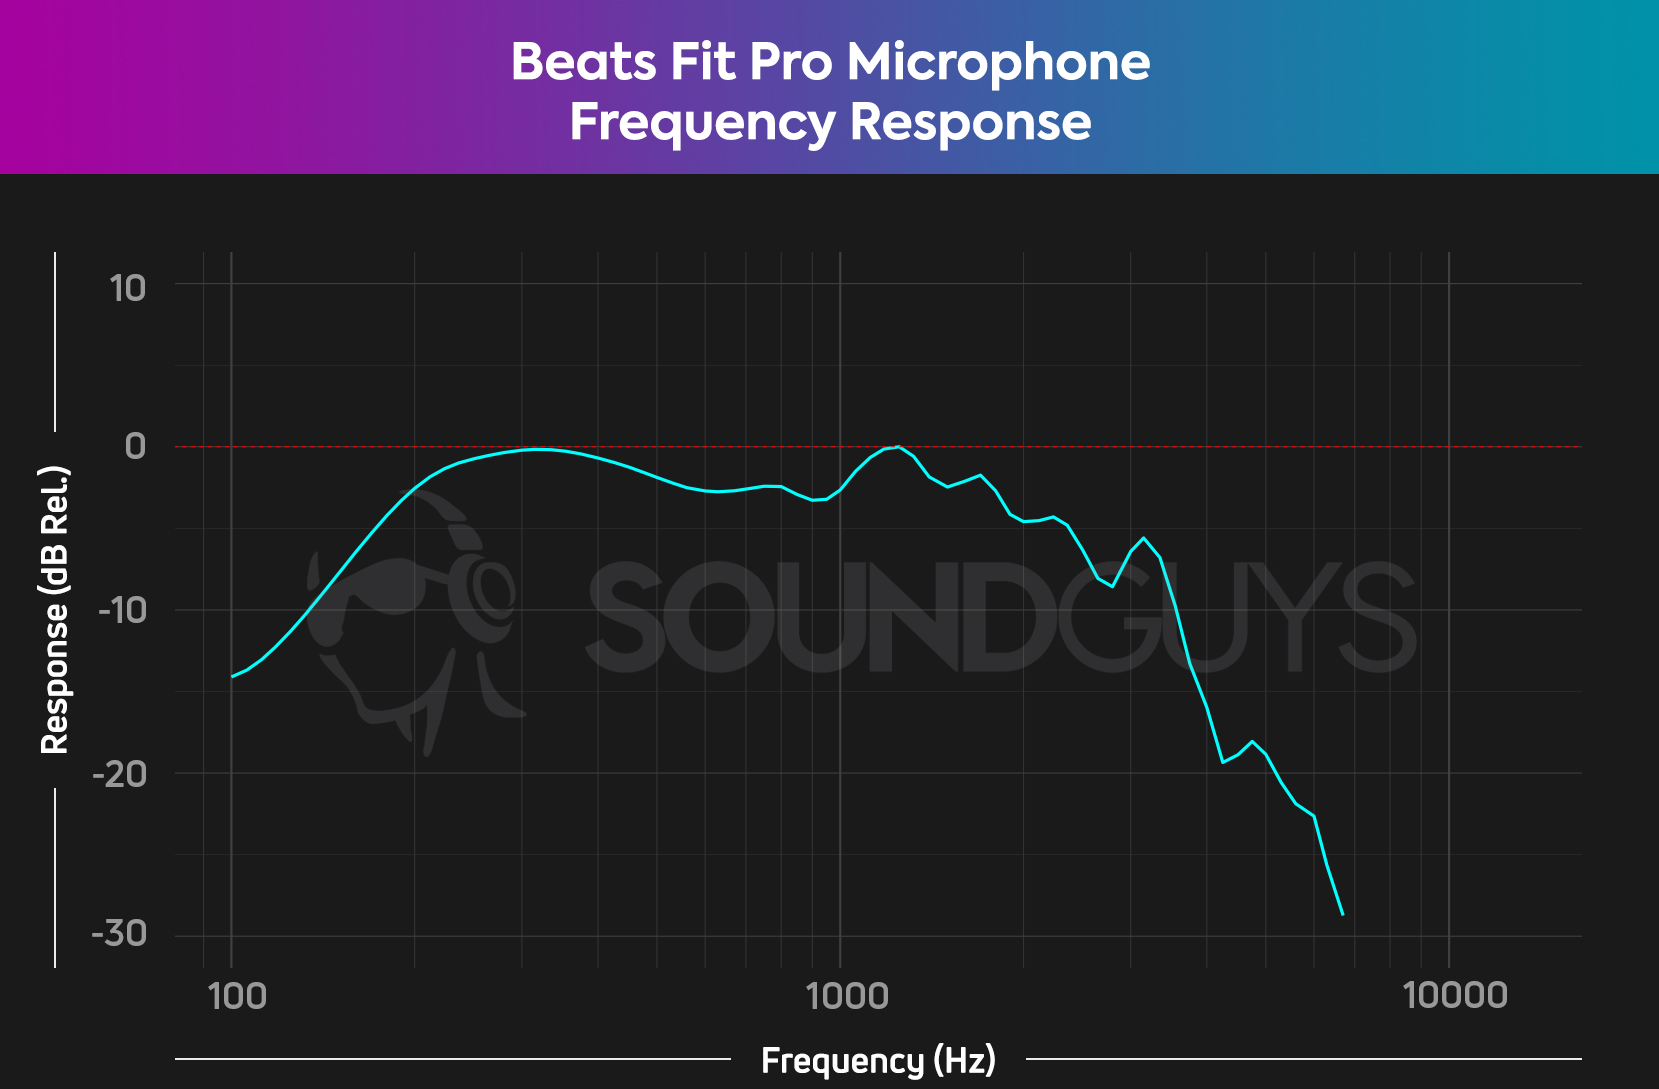 A chart shows the microphone frequency response of the Beats Fit Pro.